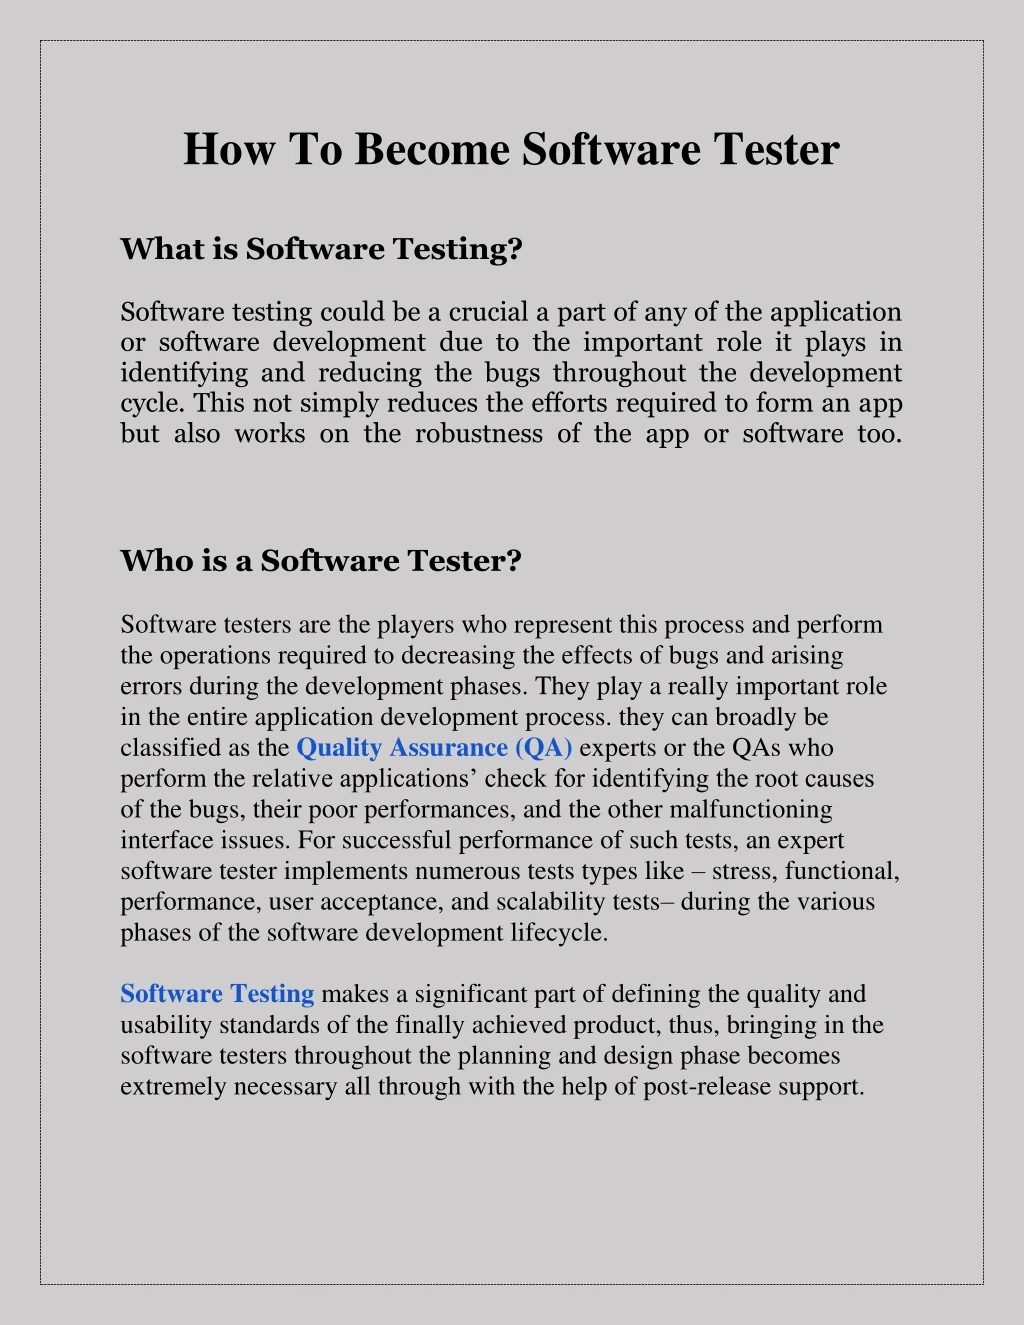 how to become software tester